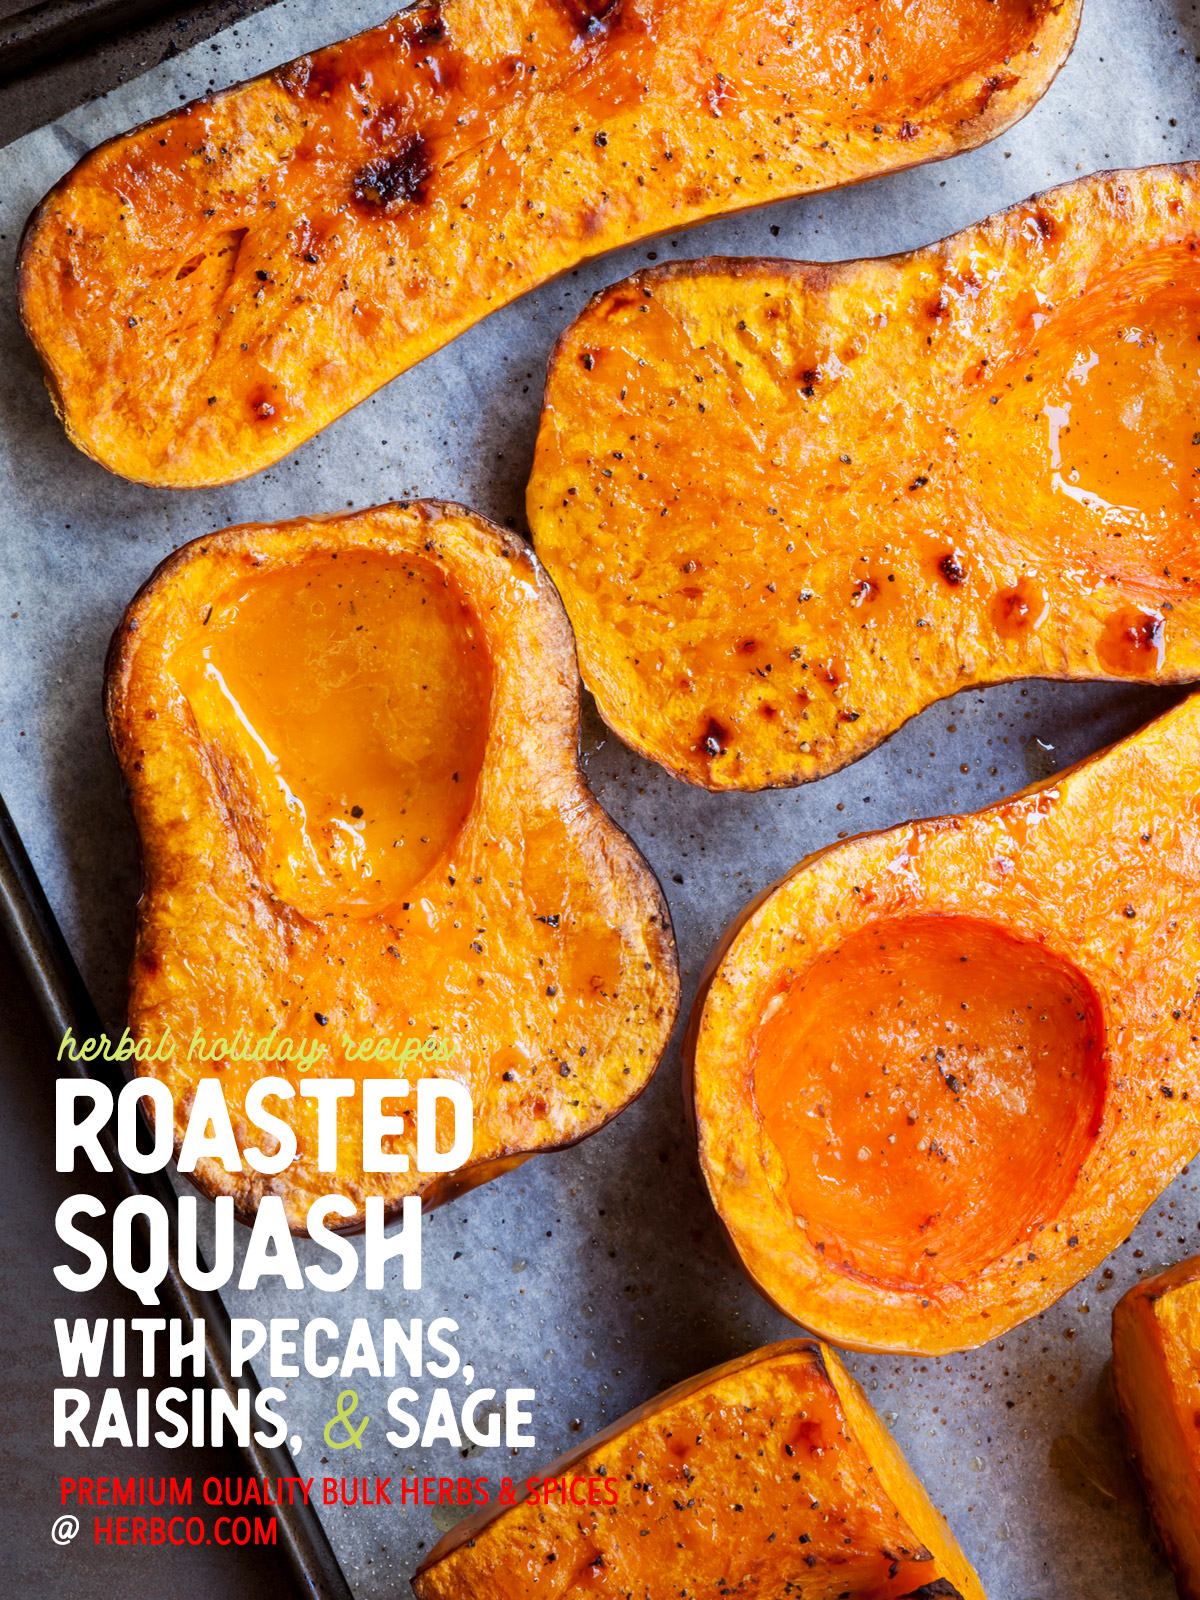 [ Recipe: Roasted Squash with pecans, raisins, and sage ] ~ from Monterey Bay Herb Co